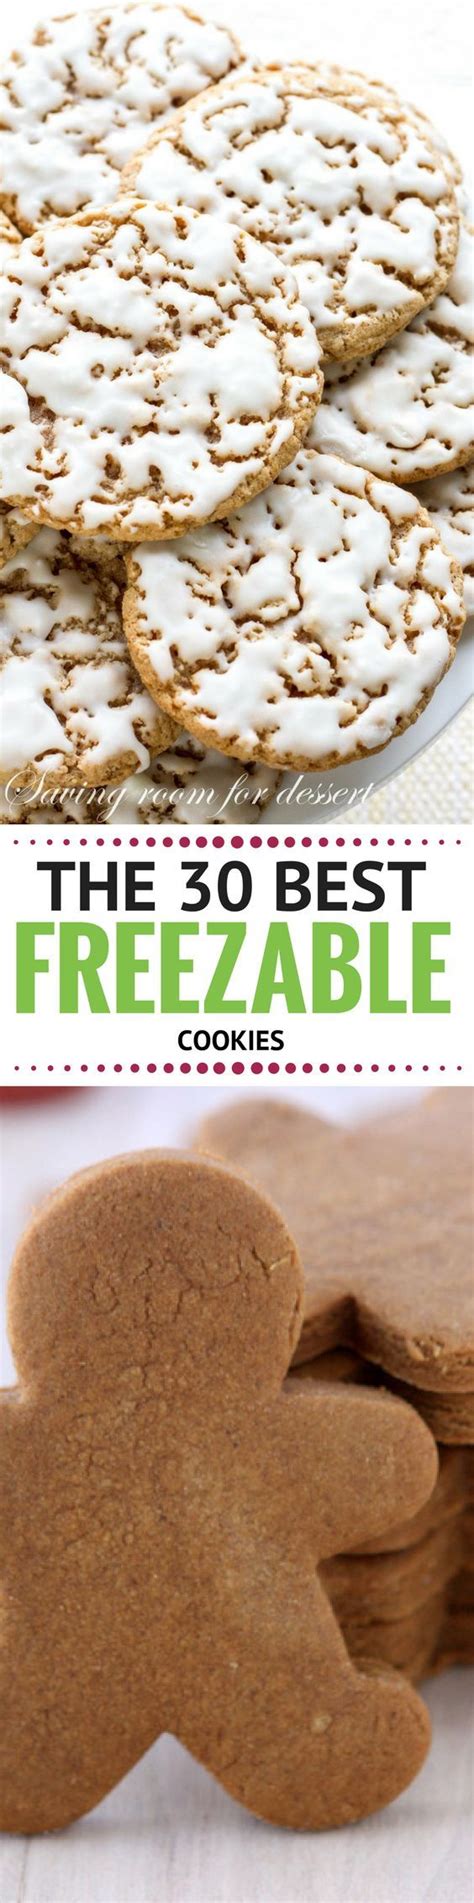 Make the same cookies and icing as you would for the stamp cookies above, but instead of directly stamping gel color onto them, mix up edible cookie paints (mccormick has instructions for creating 19. THE 30 BEST FREEZABLE COOKIES TO KEEP YOU SANE DURING THE ...